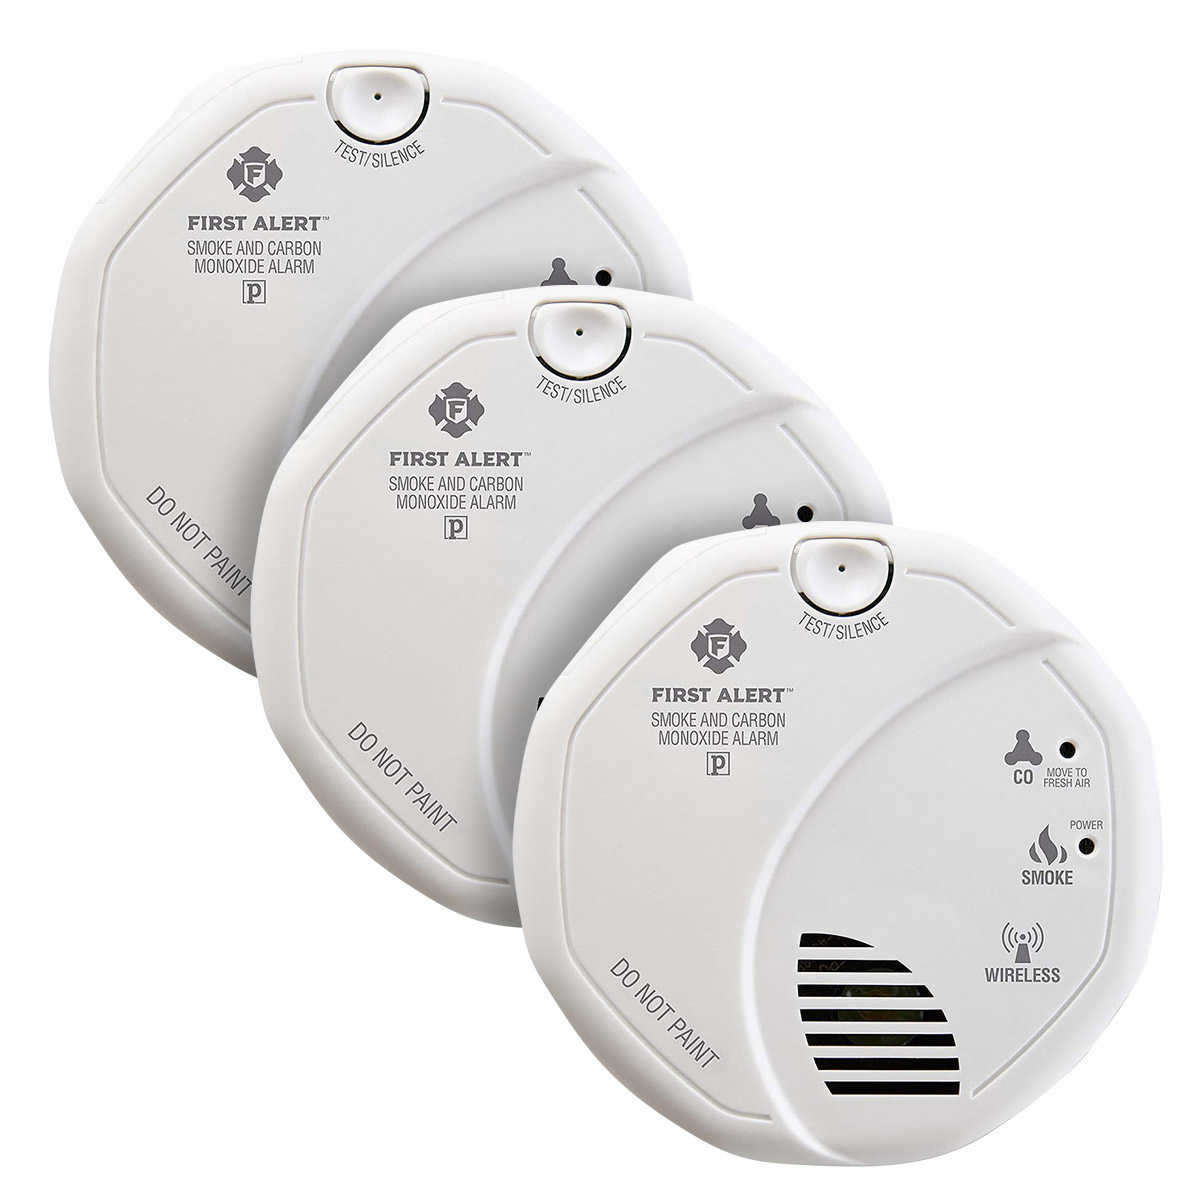 Costco members: 3-pack First Alert Z-Wave smoke & carbon monoxide alarm for $80